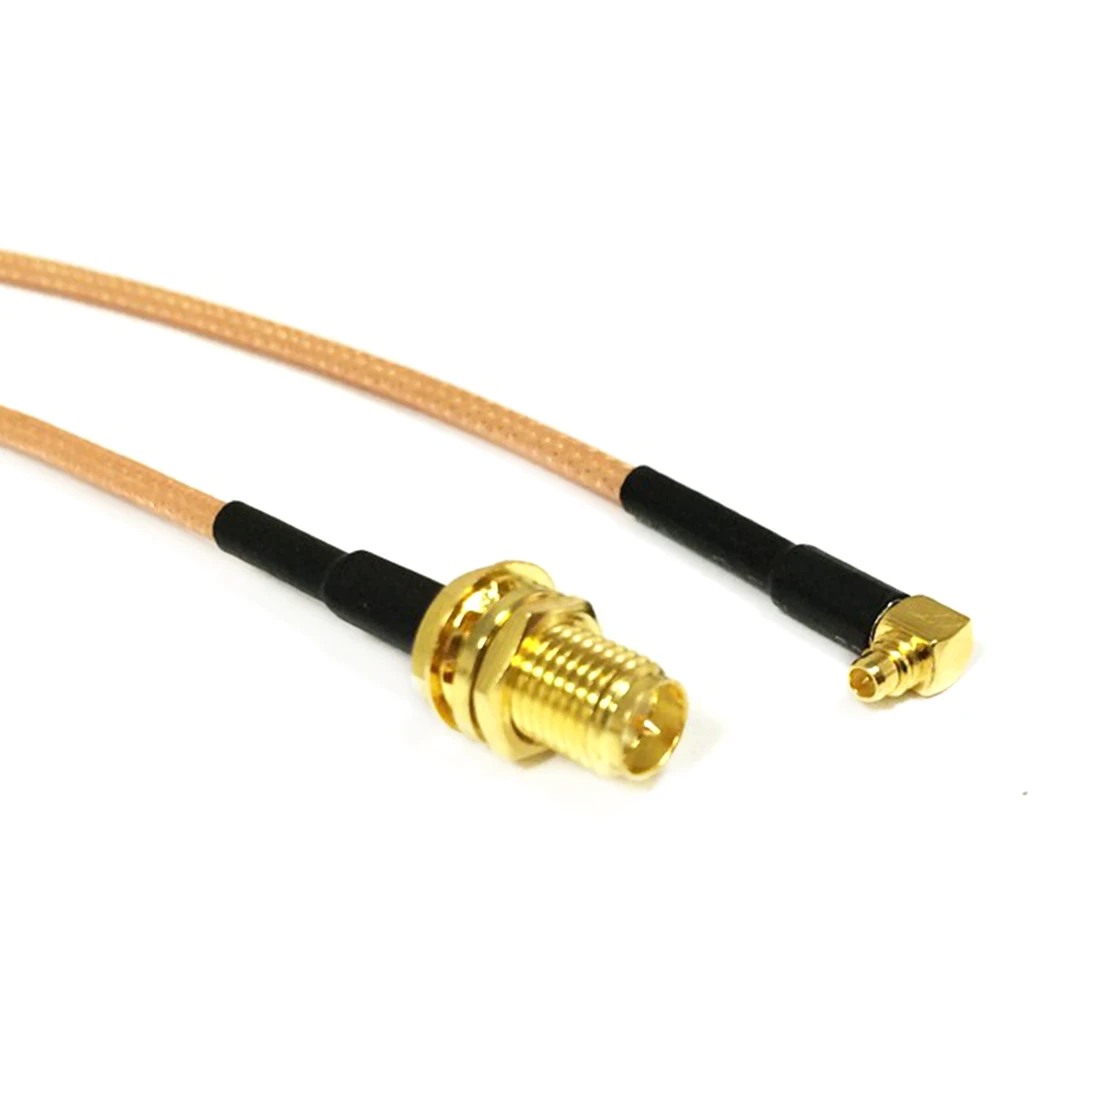 

New RP SMA Female Jack to MMCX Male Plug Right Angle RG316 Coaxial Cable 15cm 6inch for Wireless Antenna